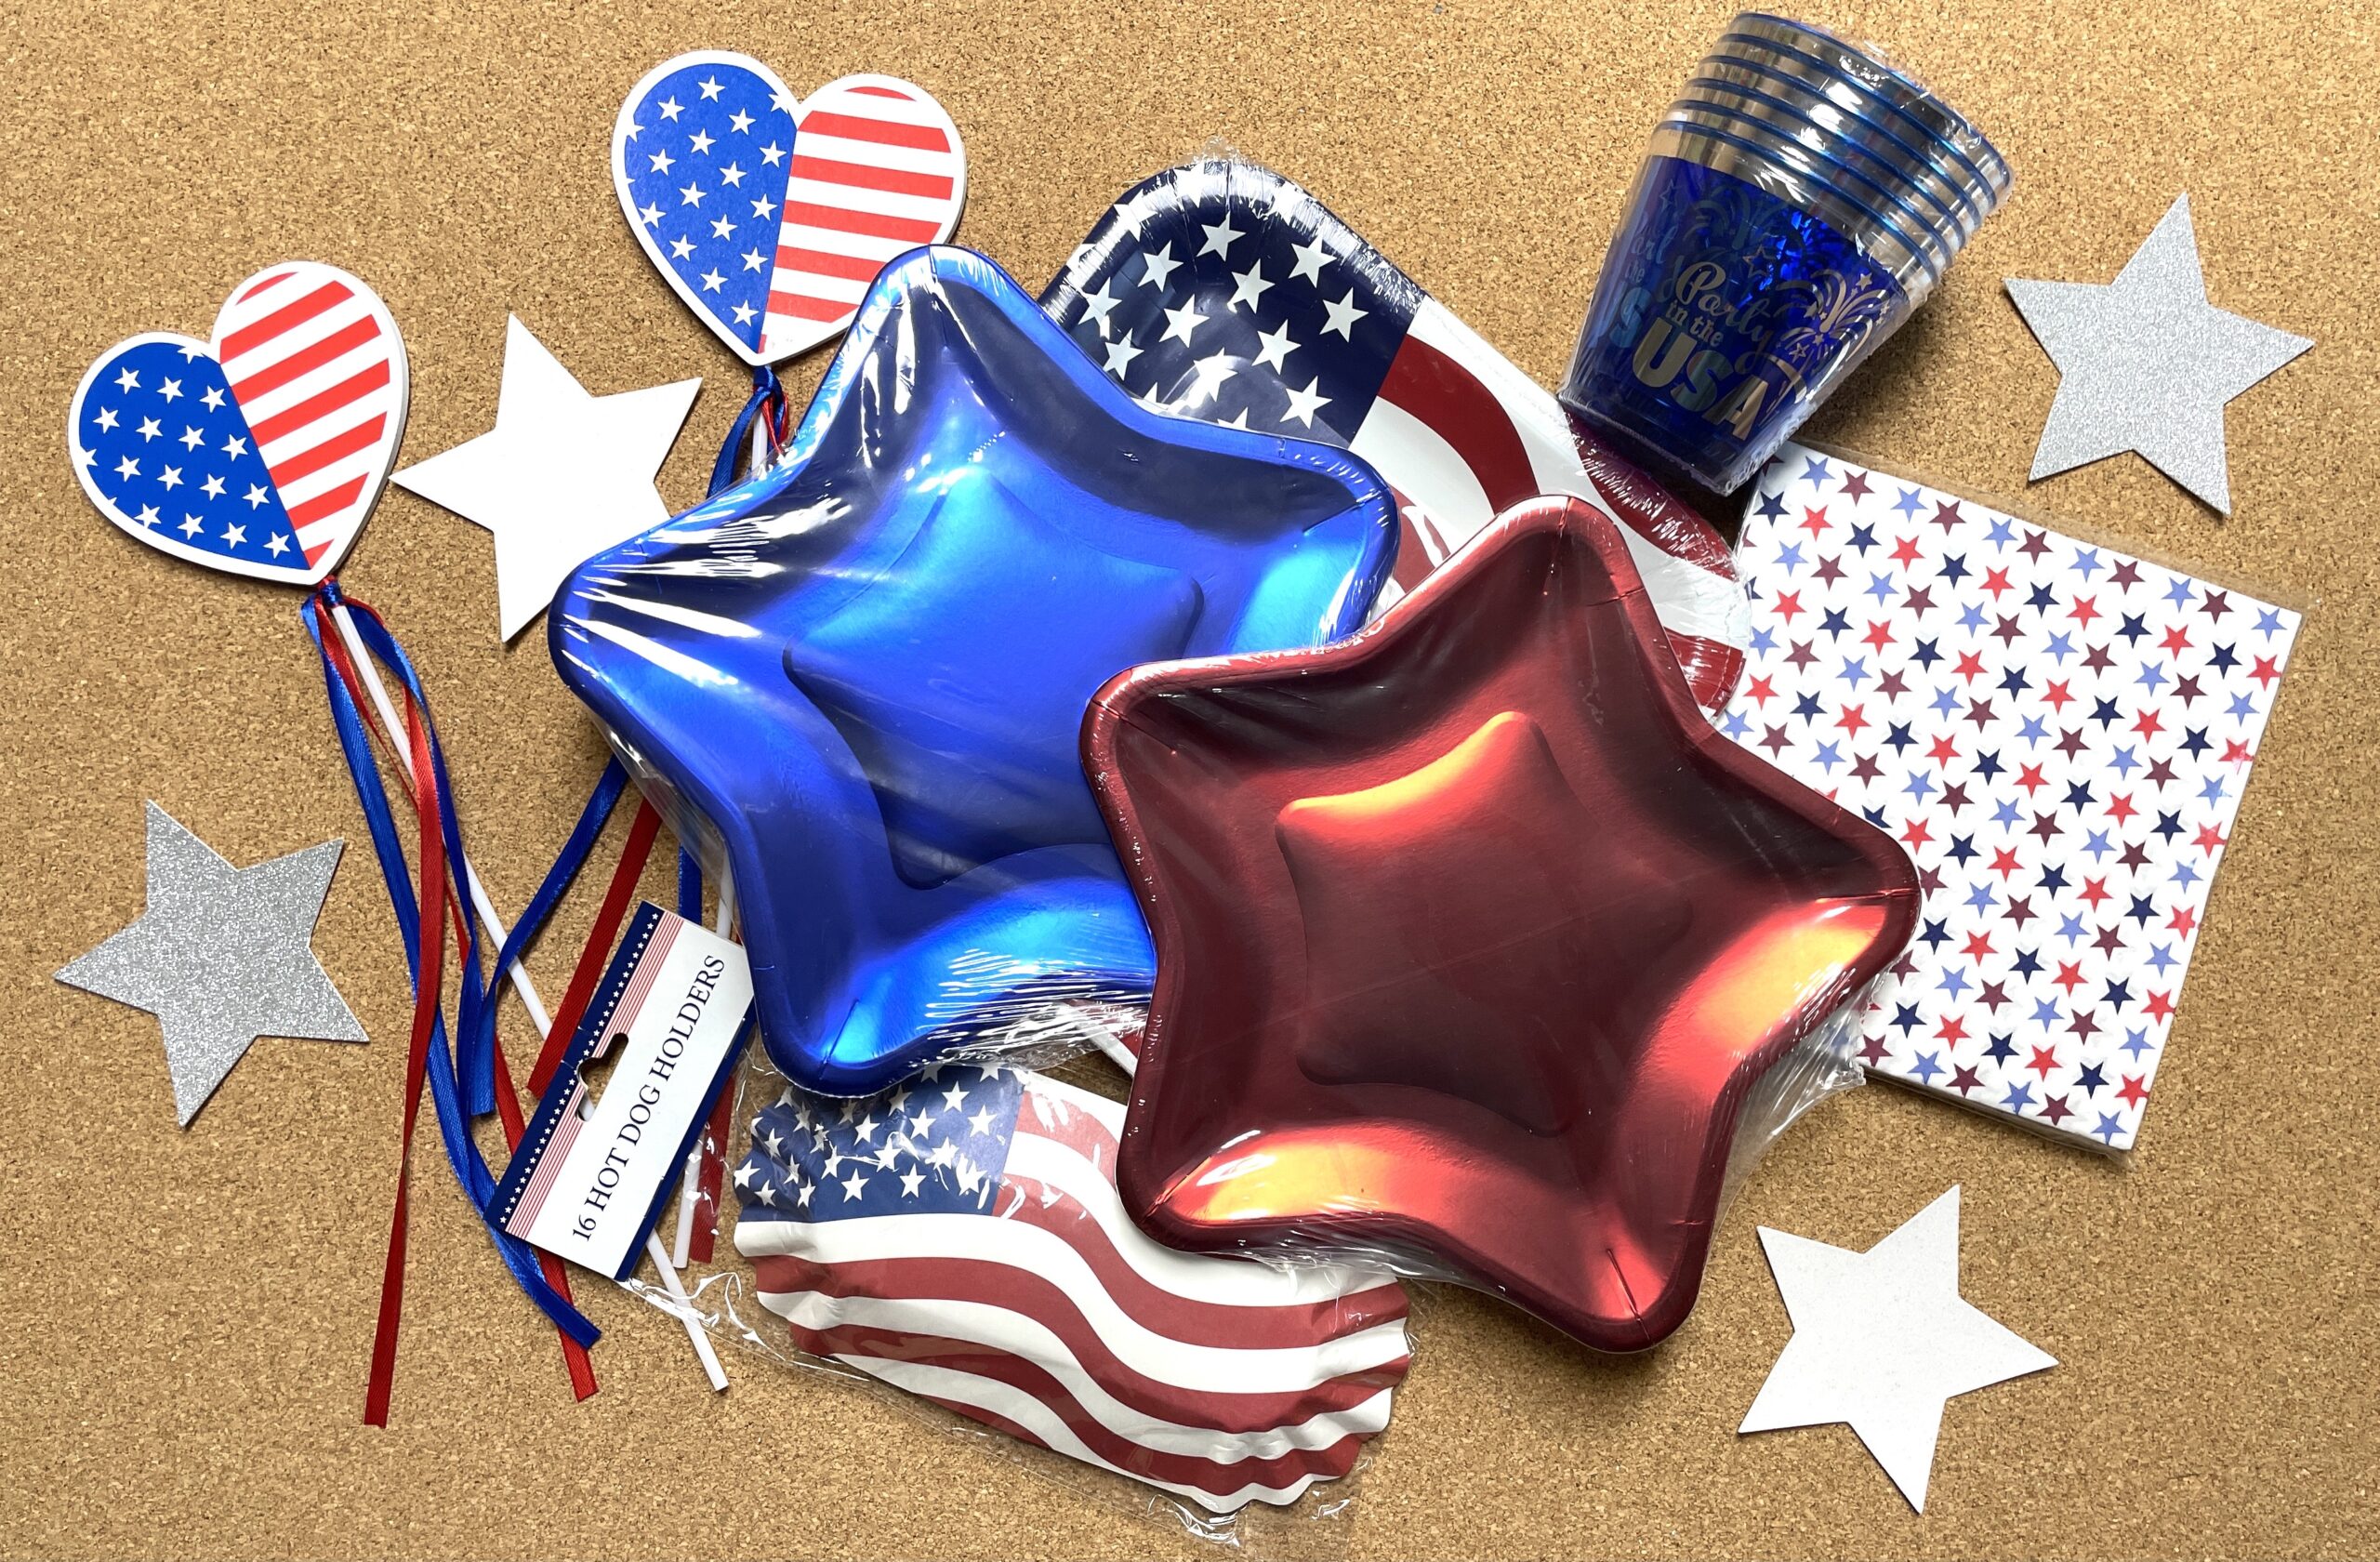 Paper plates, cups, napkins, and hot dog holders in red, white, and blue with stars and stripes